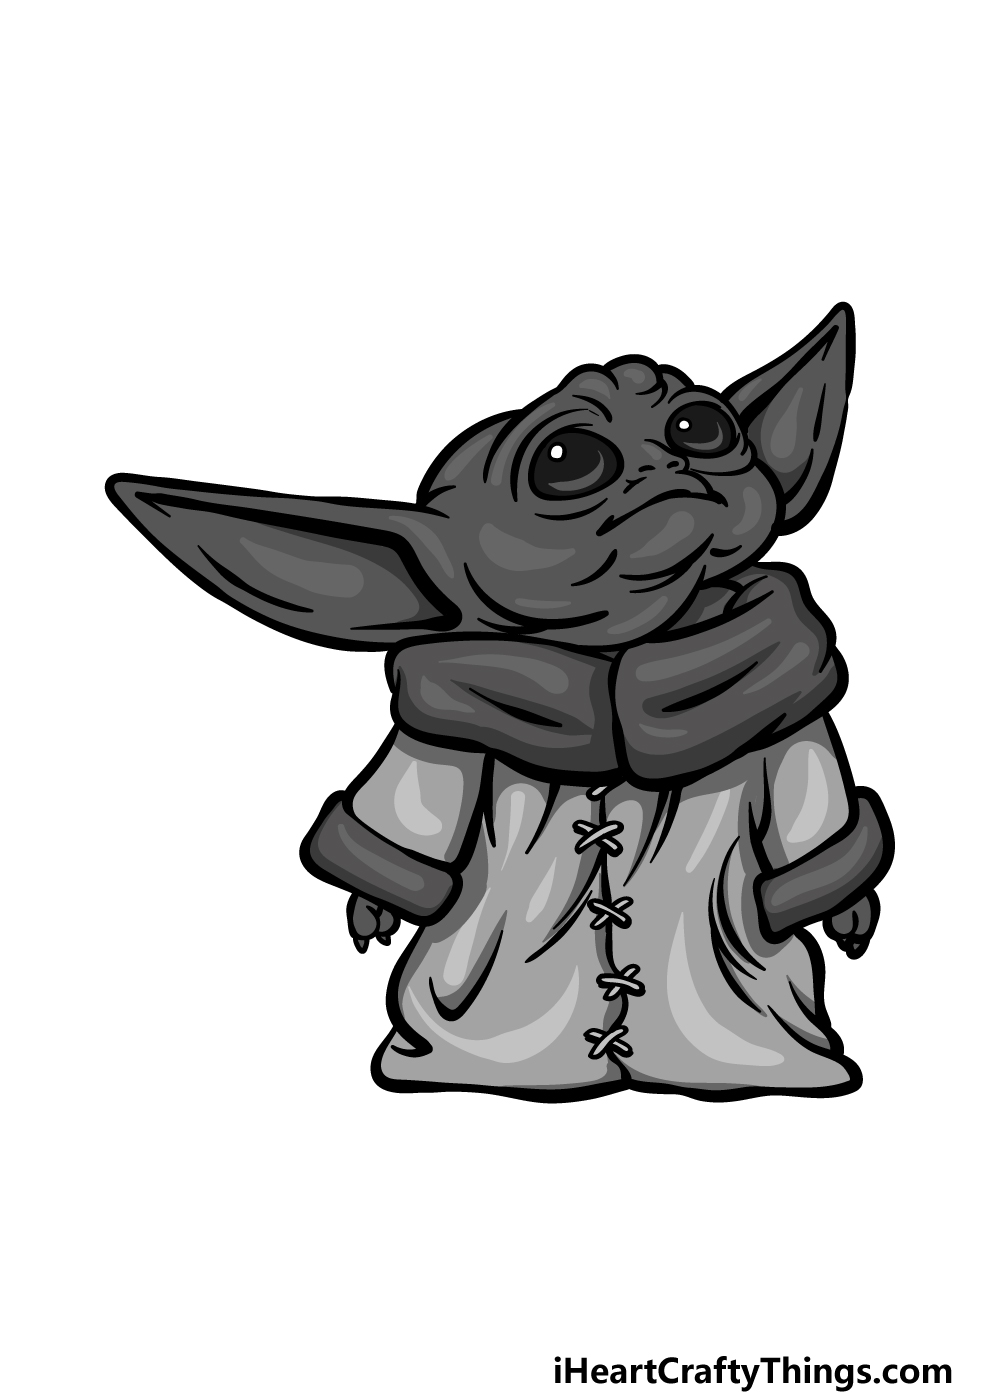 Baby Yoda In Black And White Drawing - How To Draw Baby Yoda ...